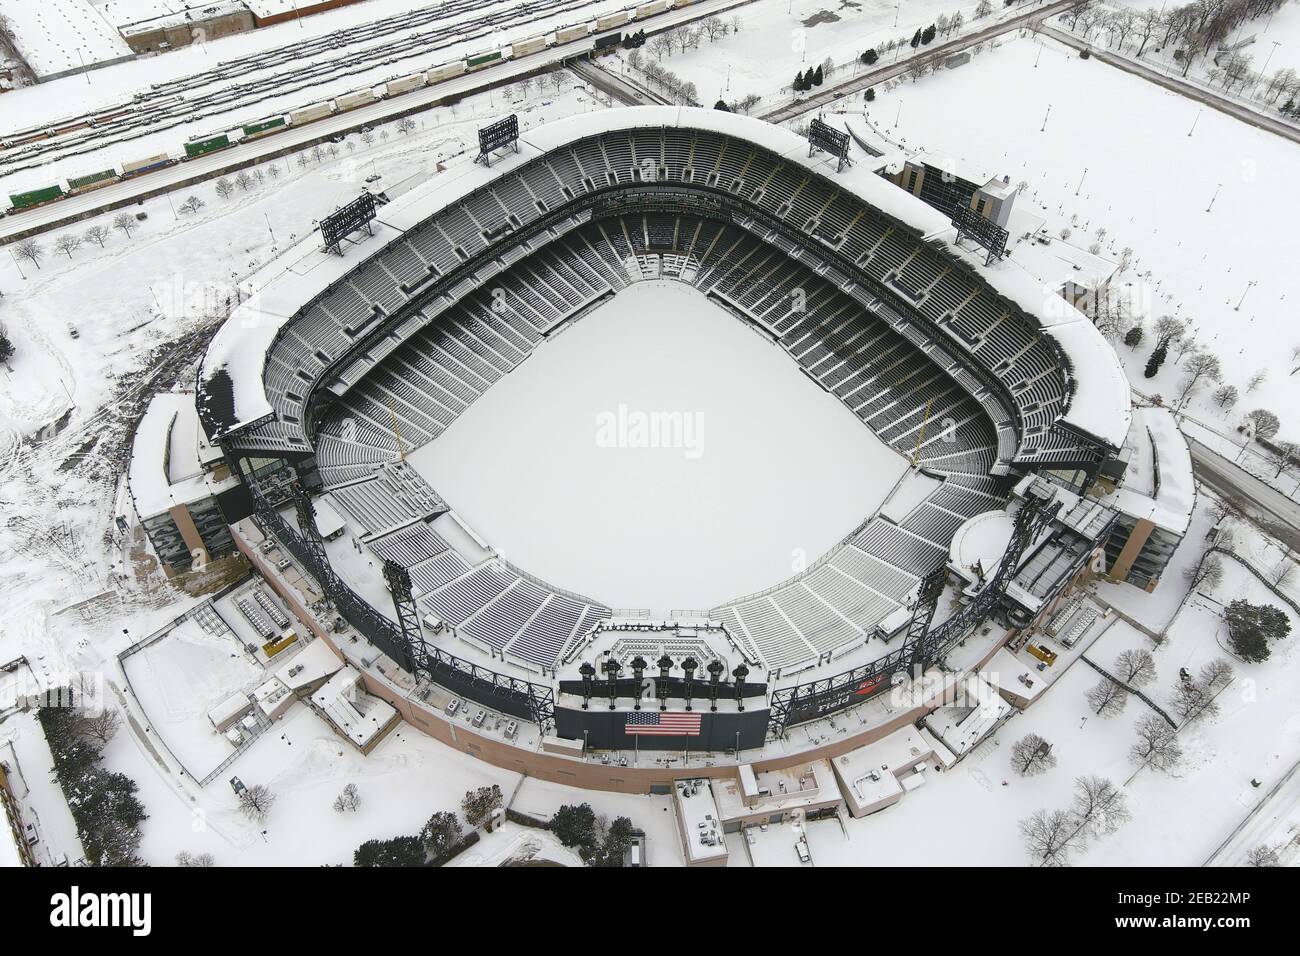 An aerial view of Guaranteed Rate Field, Sunday, Feb. 7, 2021, in